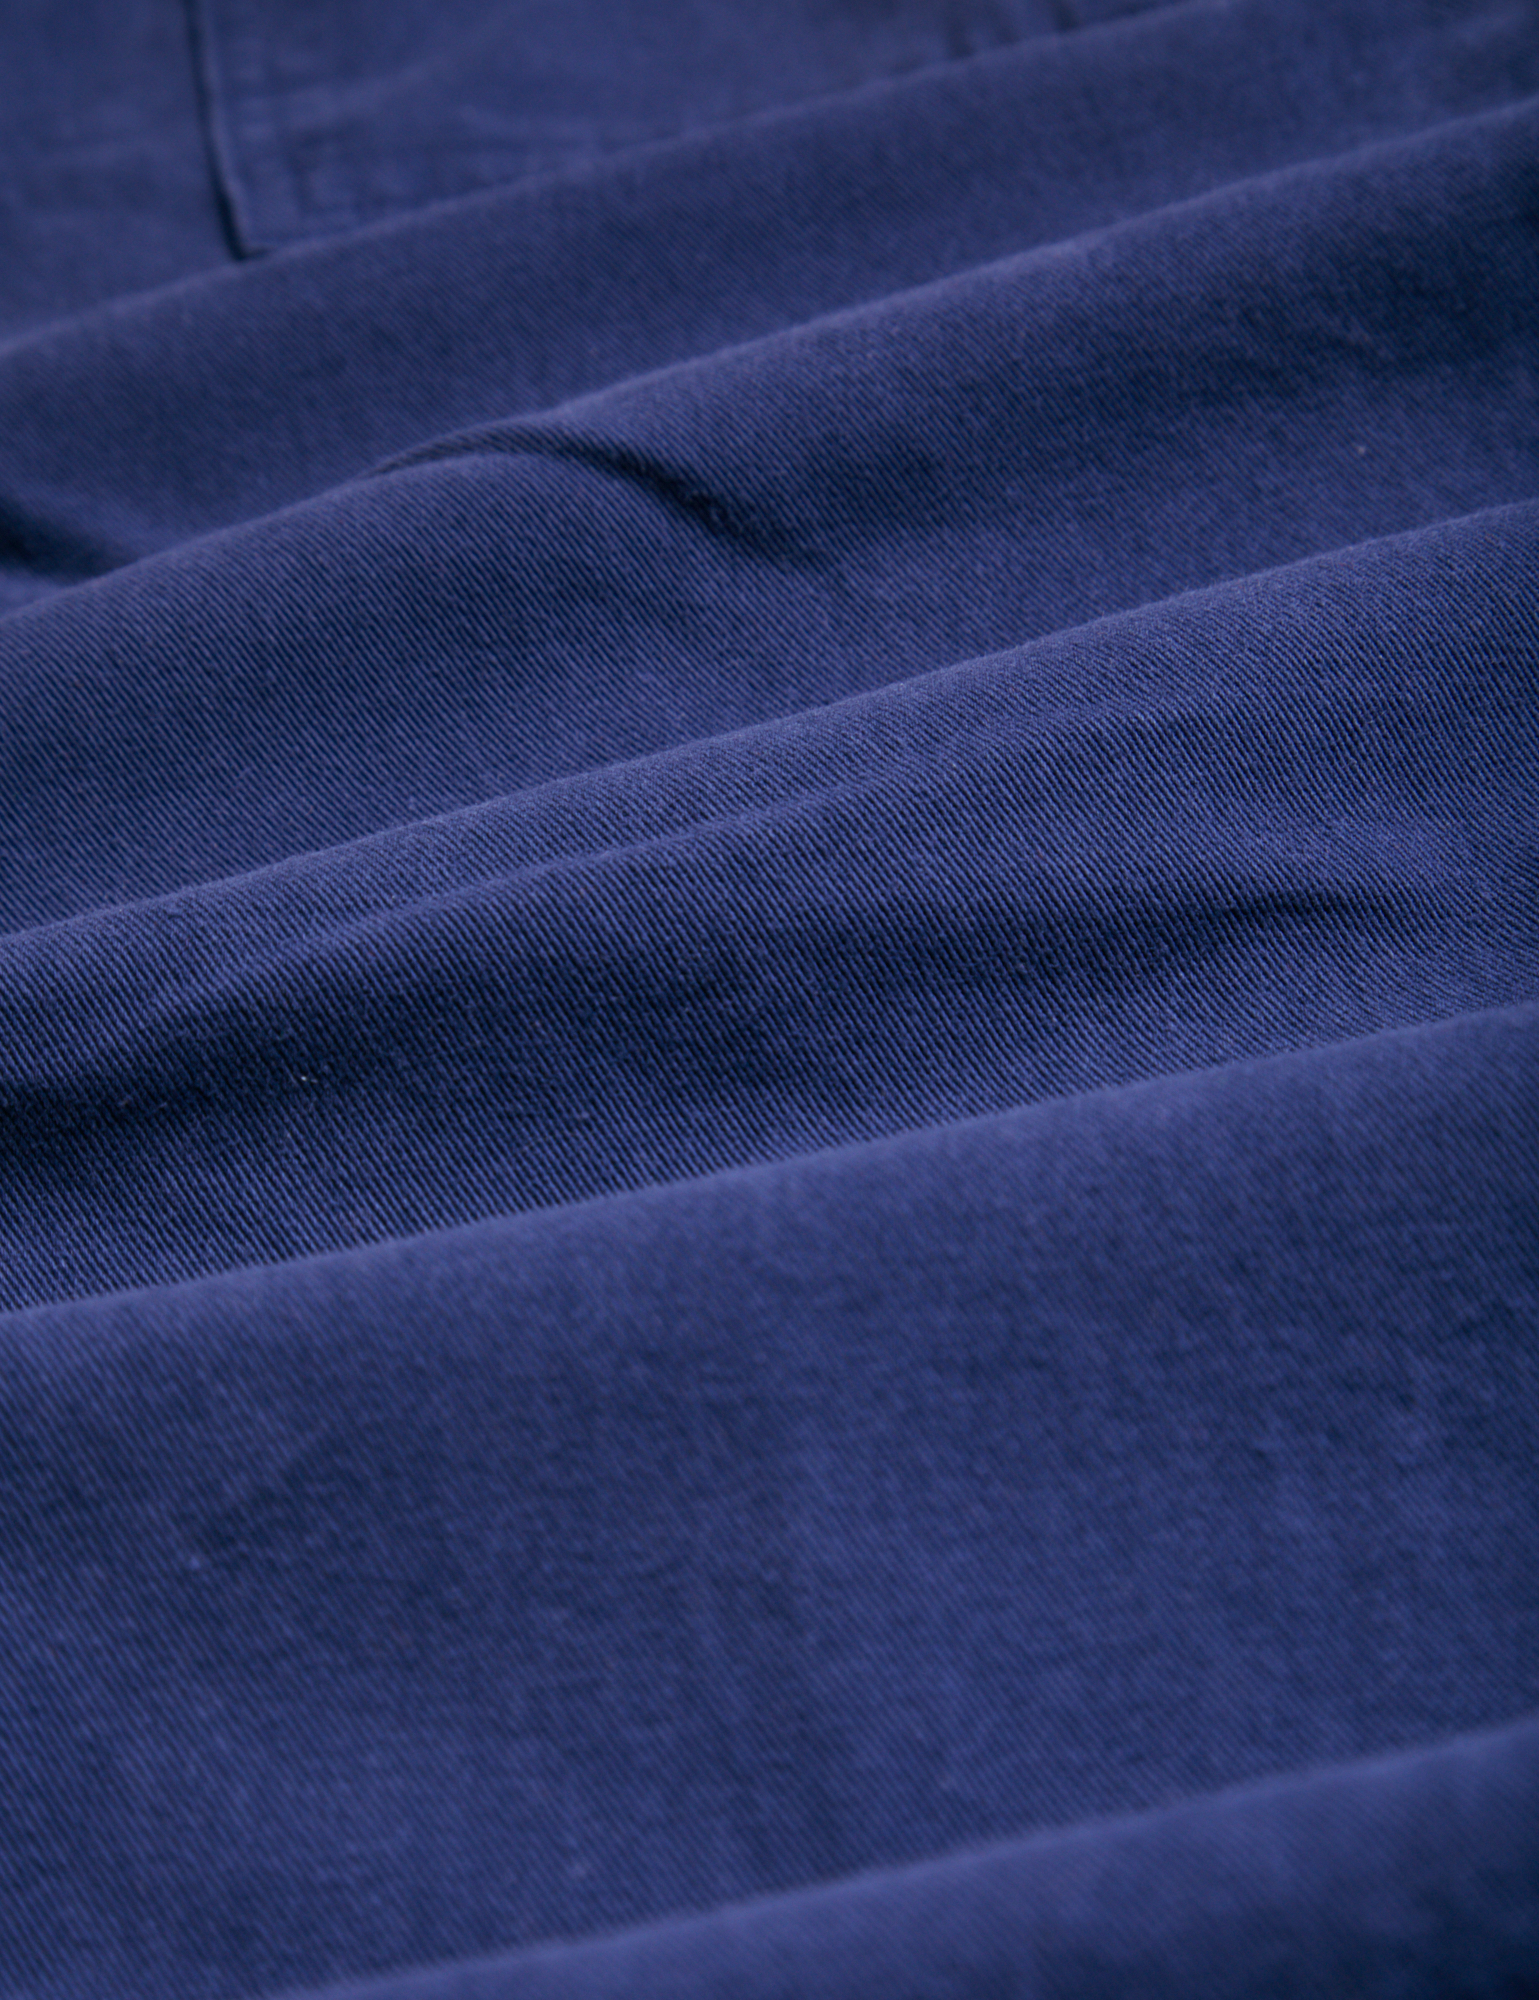 Work Pants in Navy Blue detail close up of fabric